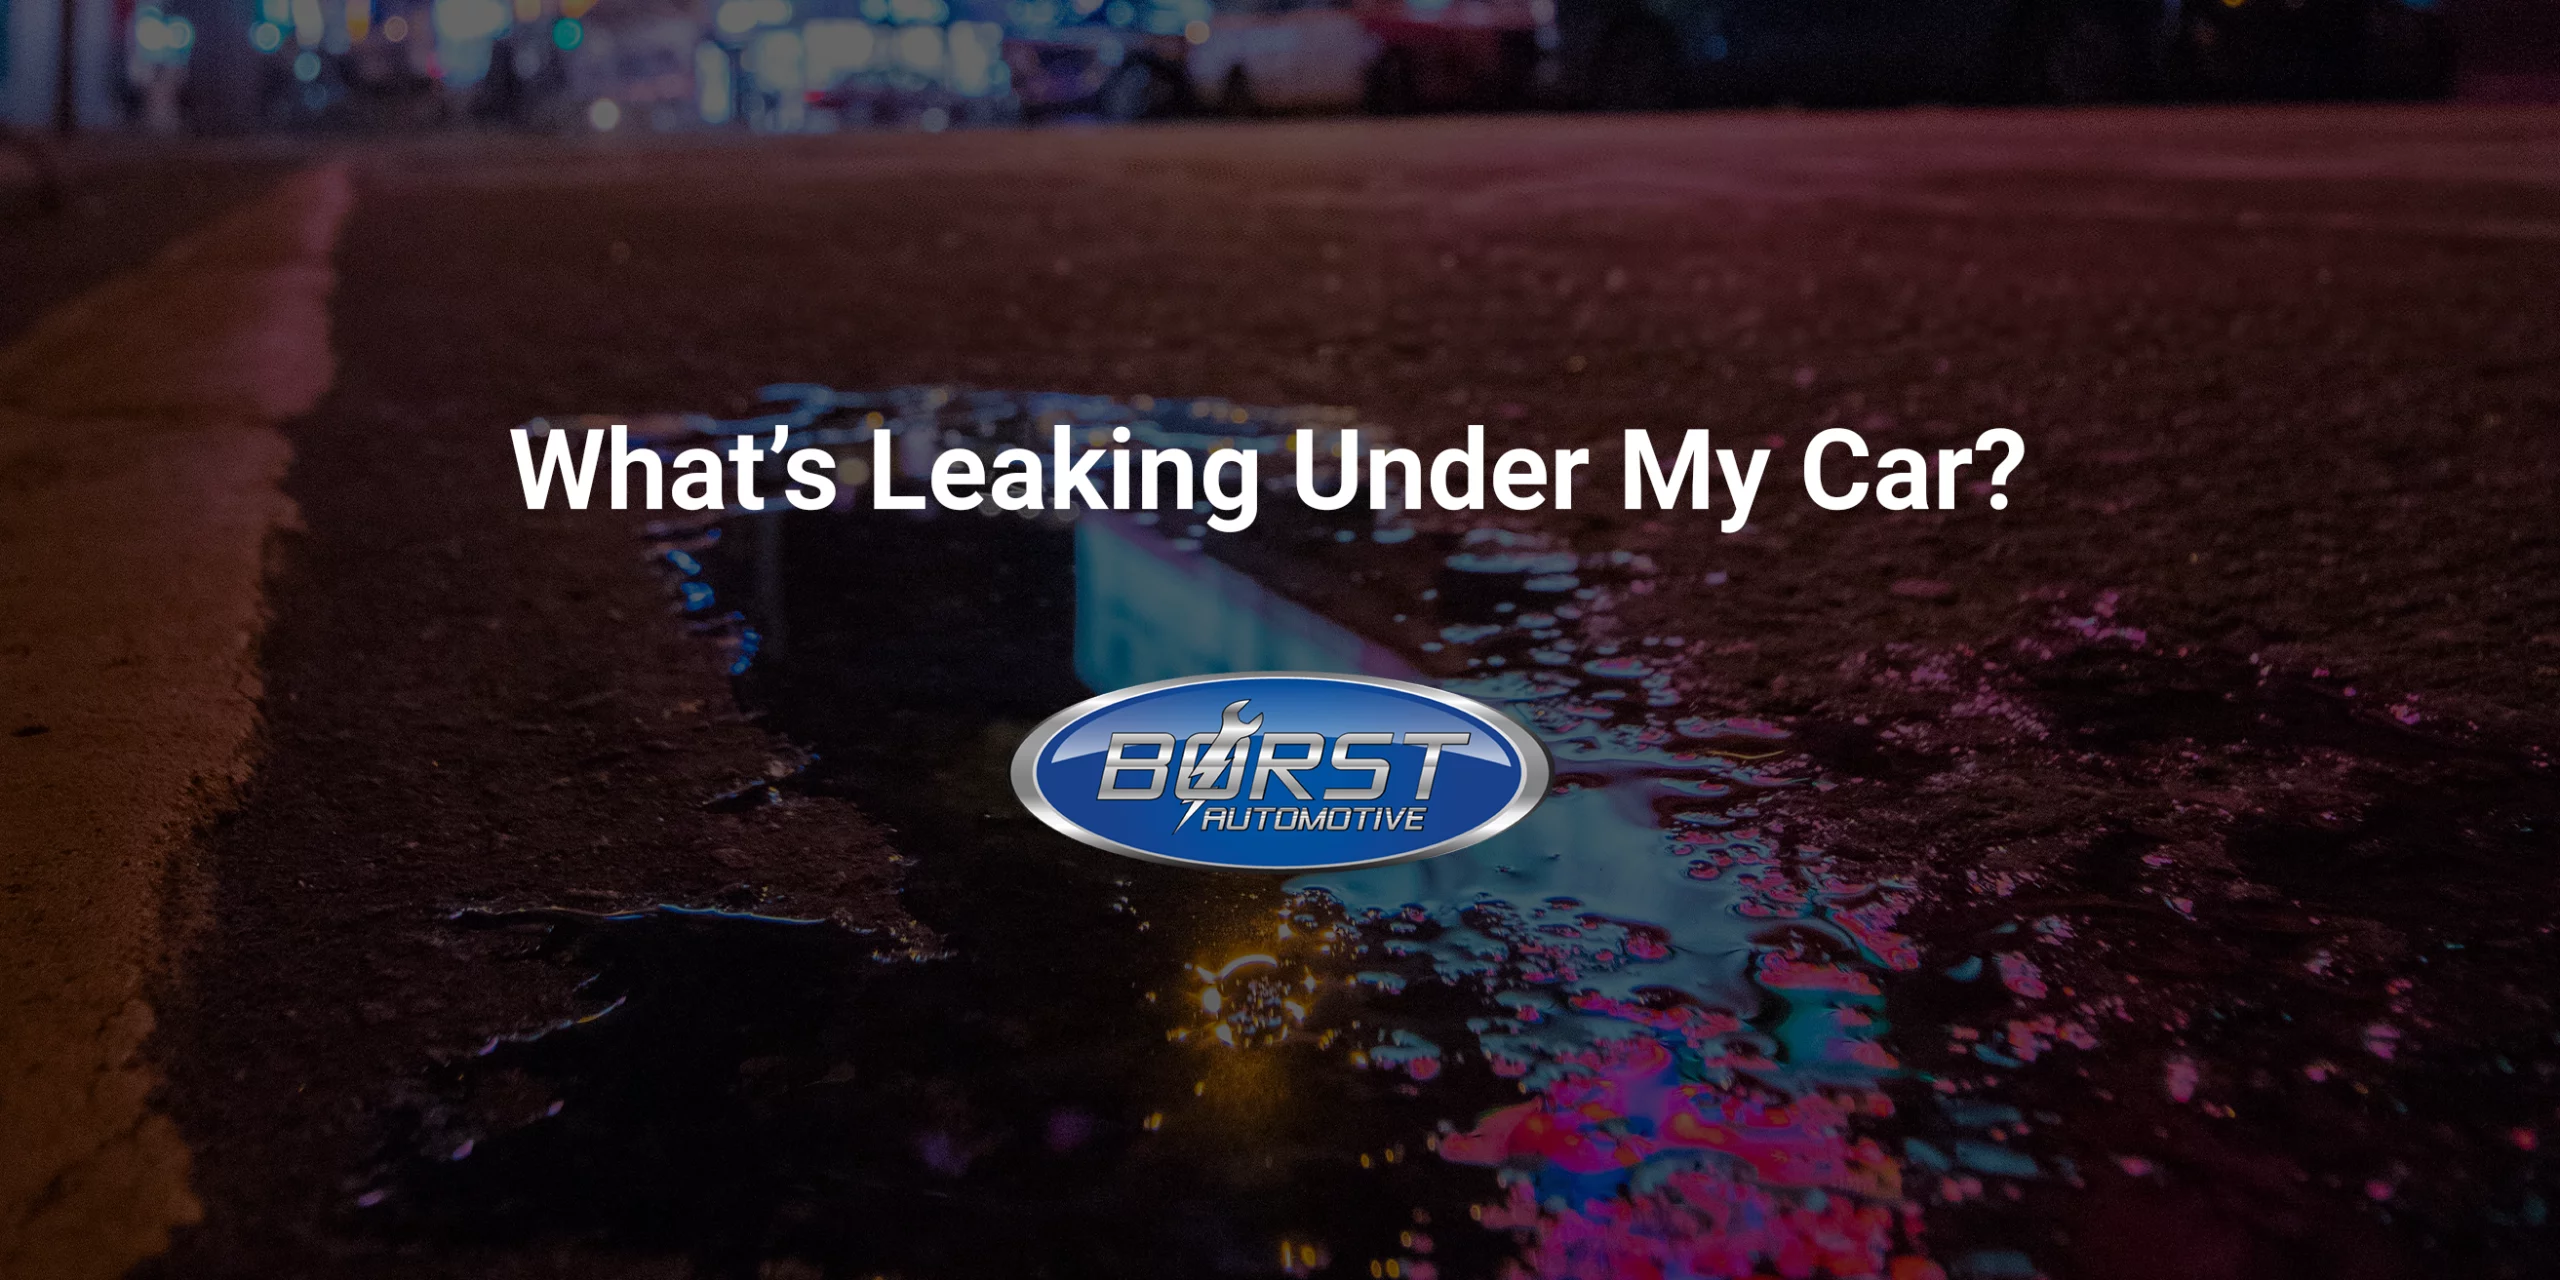 What’s Leaking Under My Car?